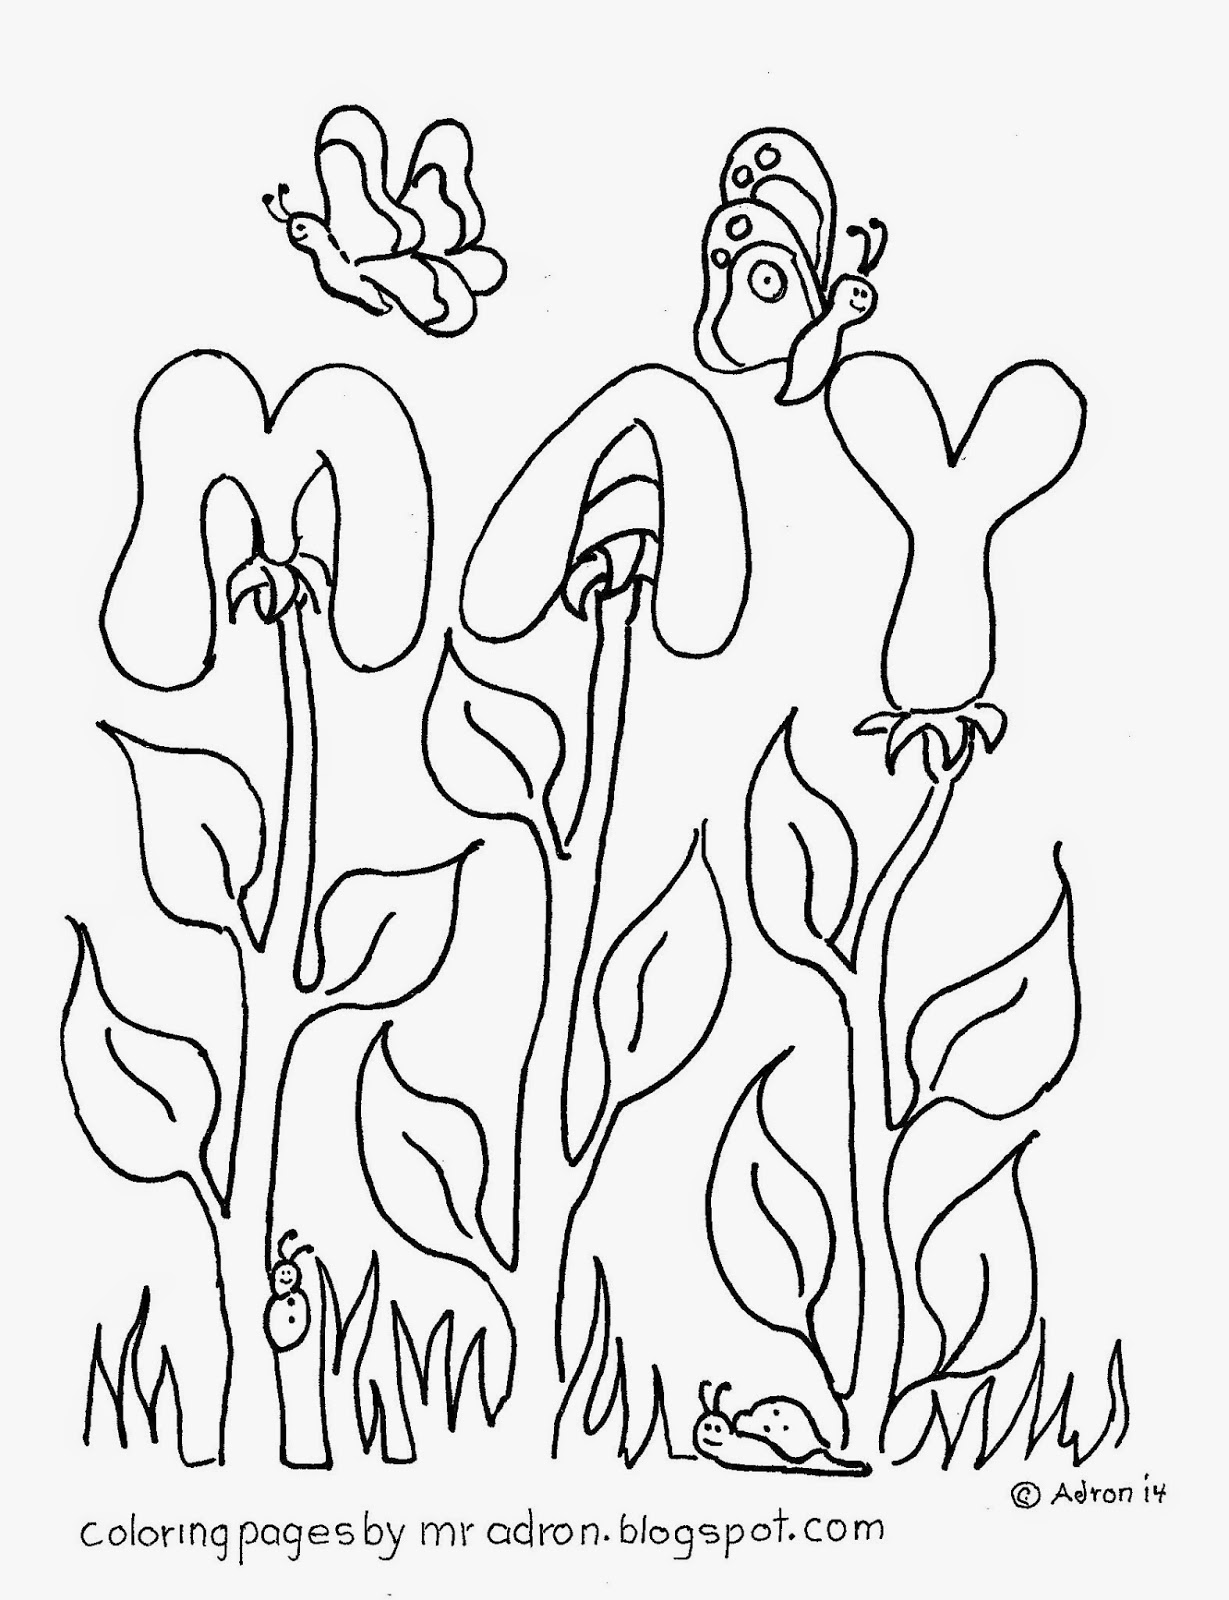 Coloring Pages for Kids by Mr. Adron: The Month Of May, Free Coloring Page